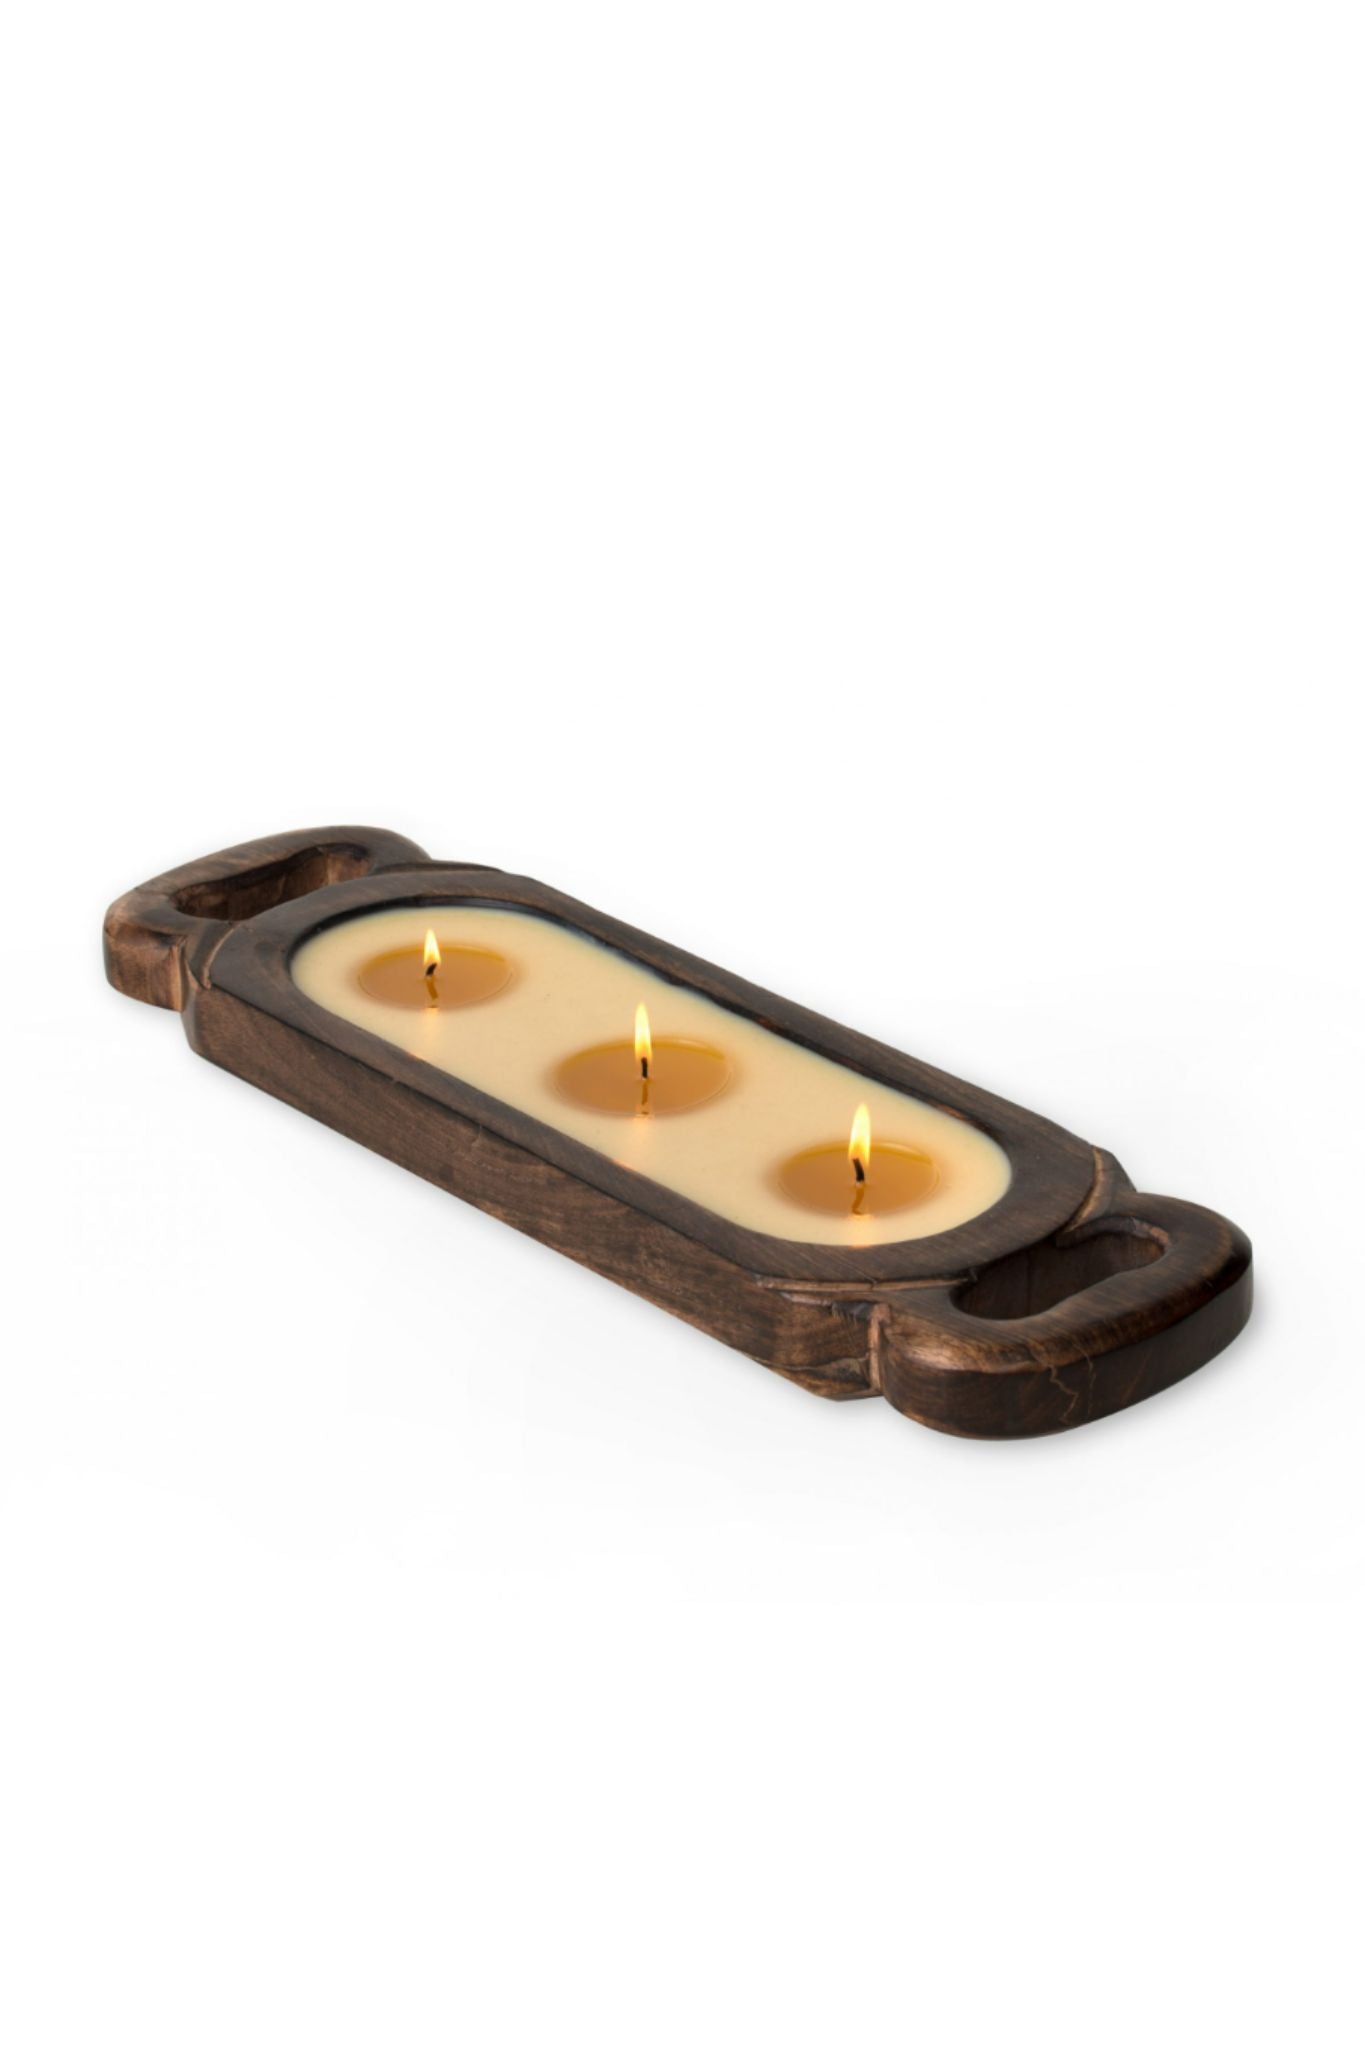 Small Wood Candle Tray (Hidden Cove)